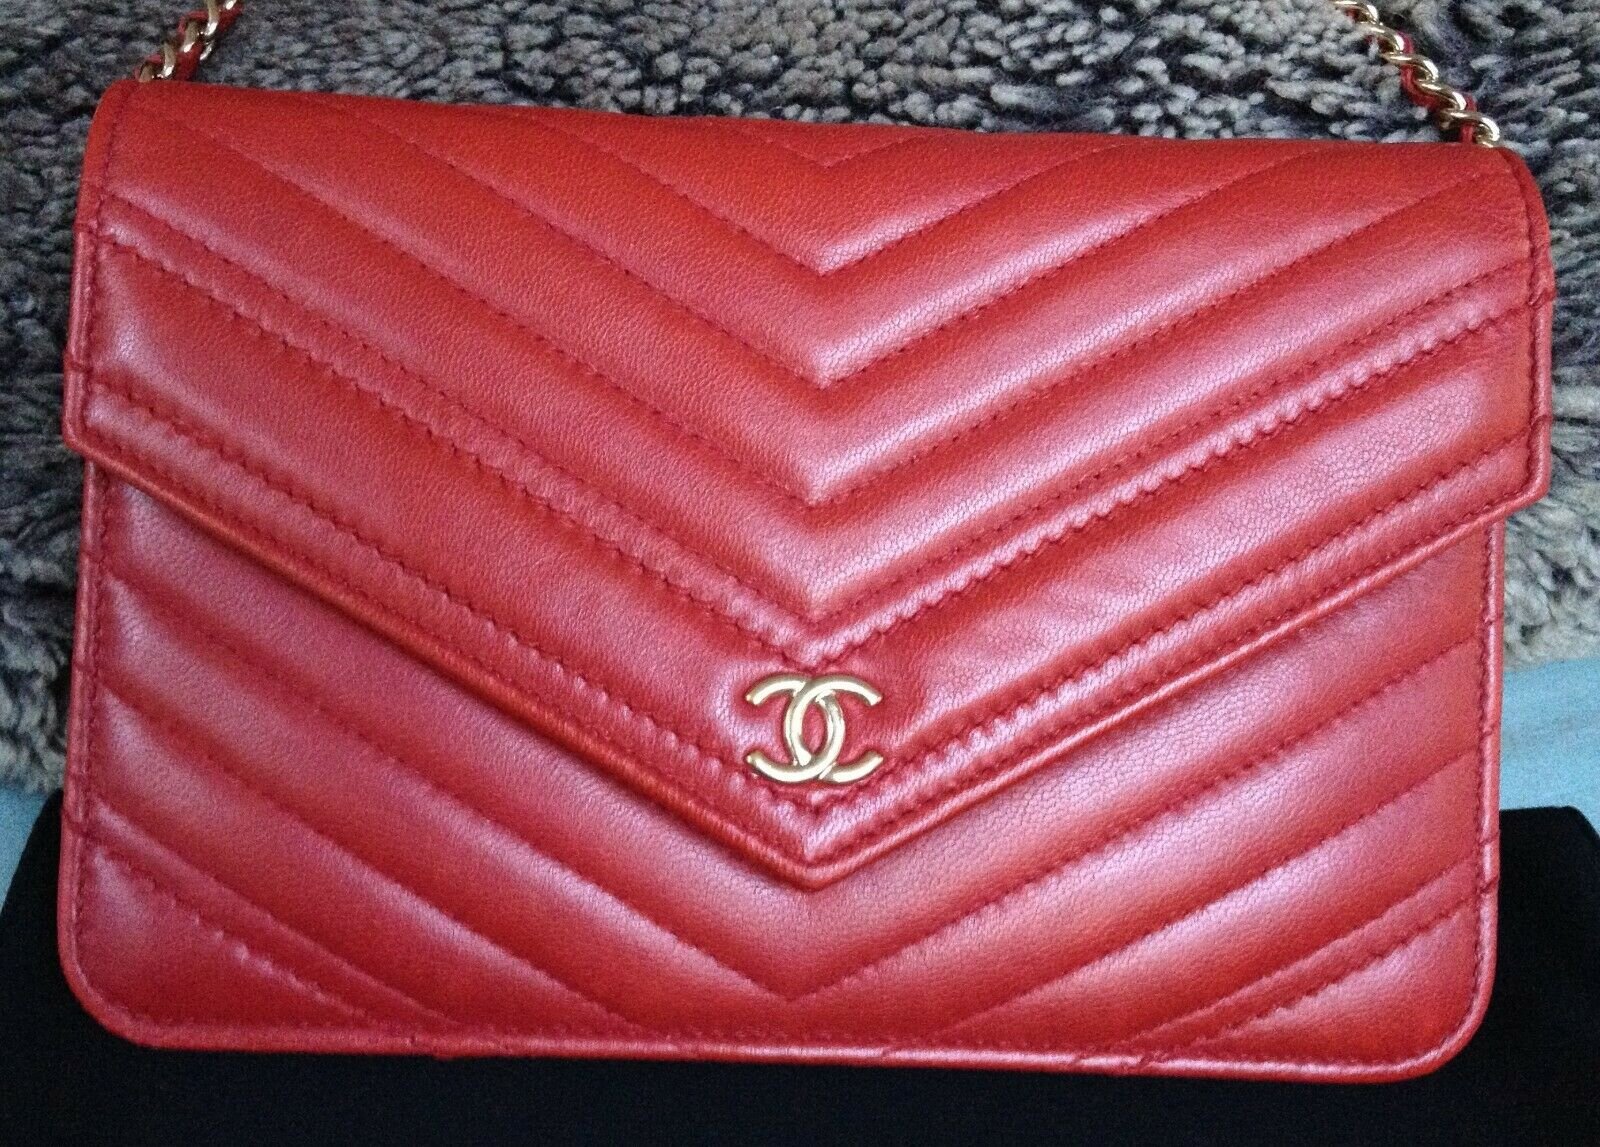 MINT 2017 Chanel Red Quilted Chevron Leather Gold Chain Crossbody WOC ...